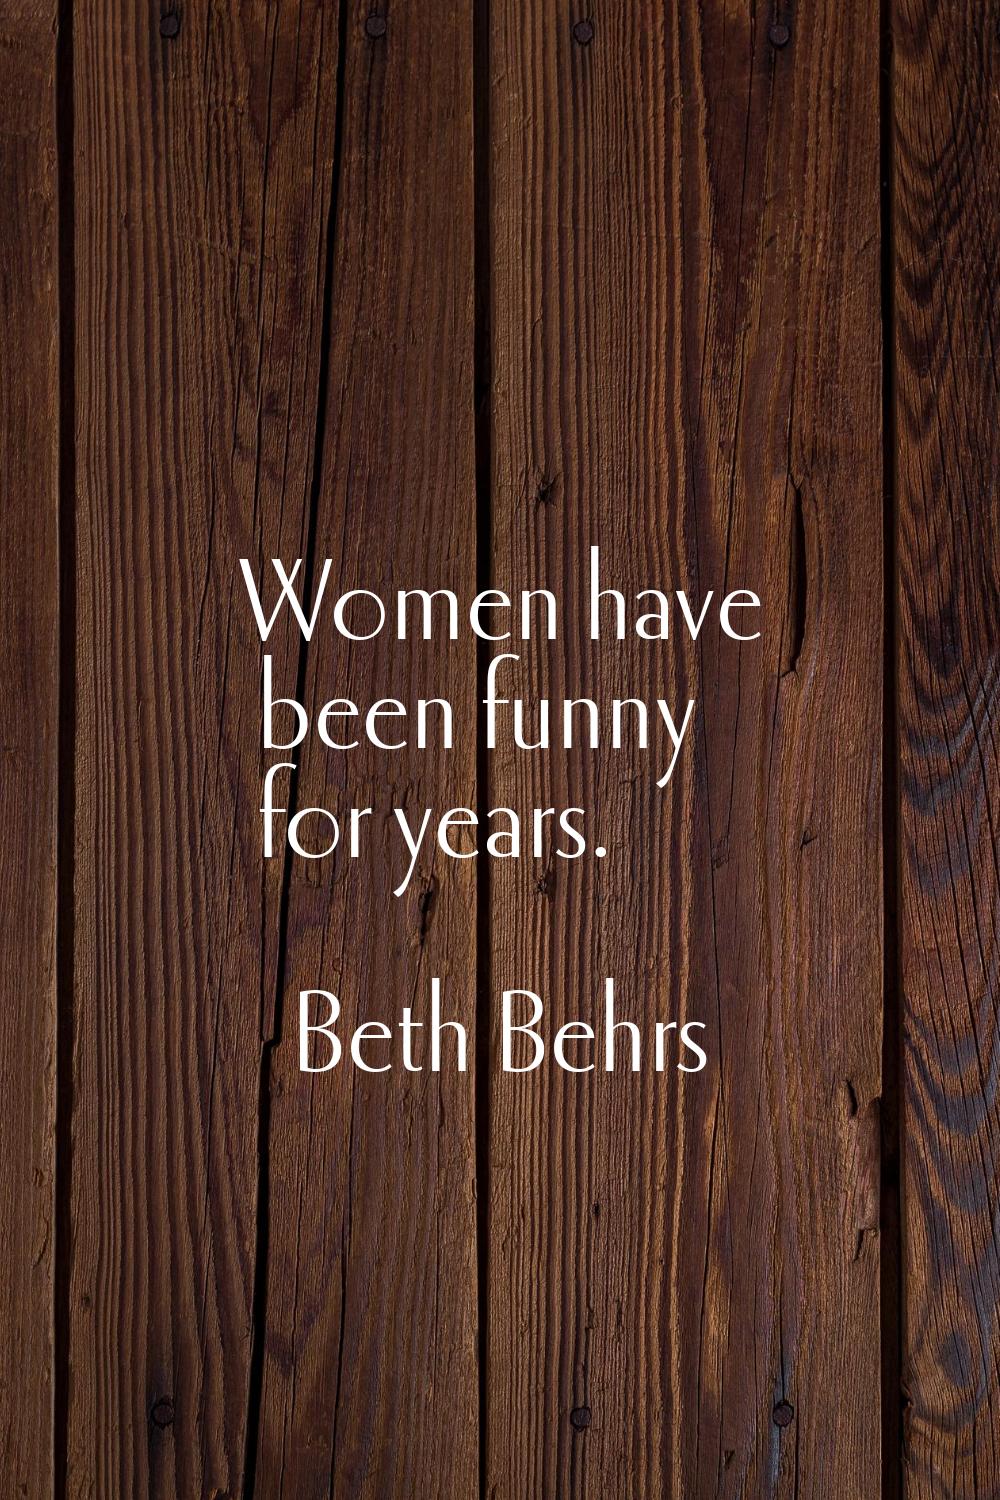 Women have been funny for years.